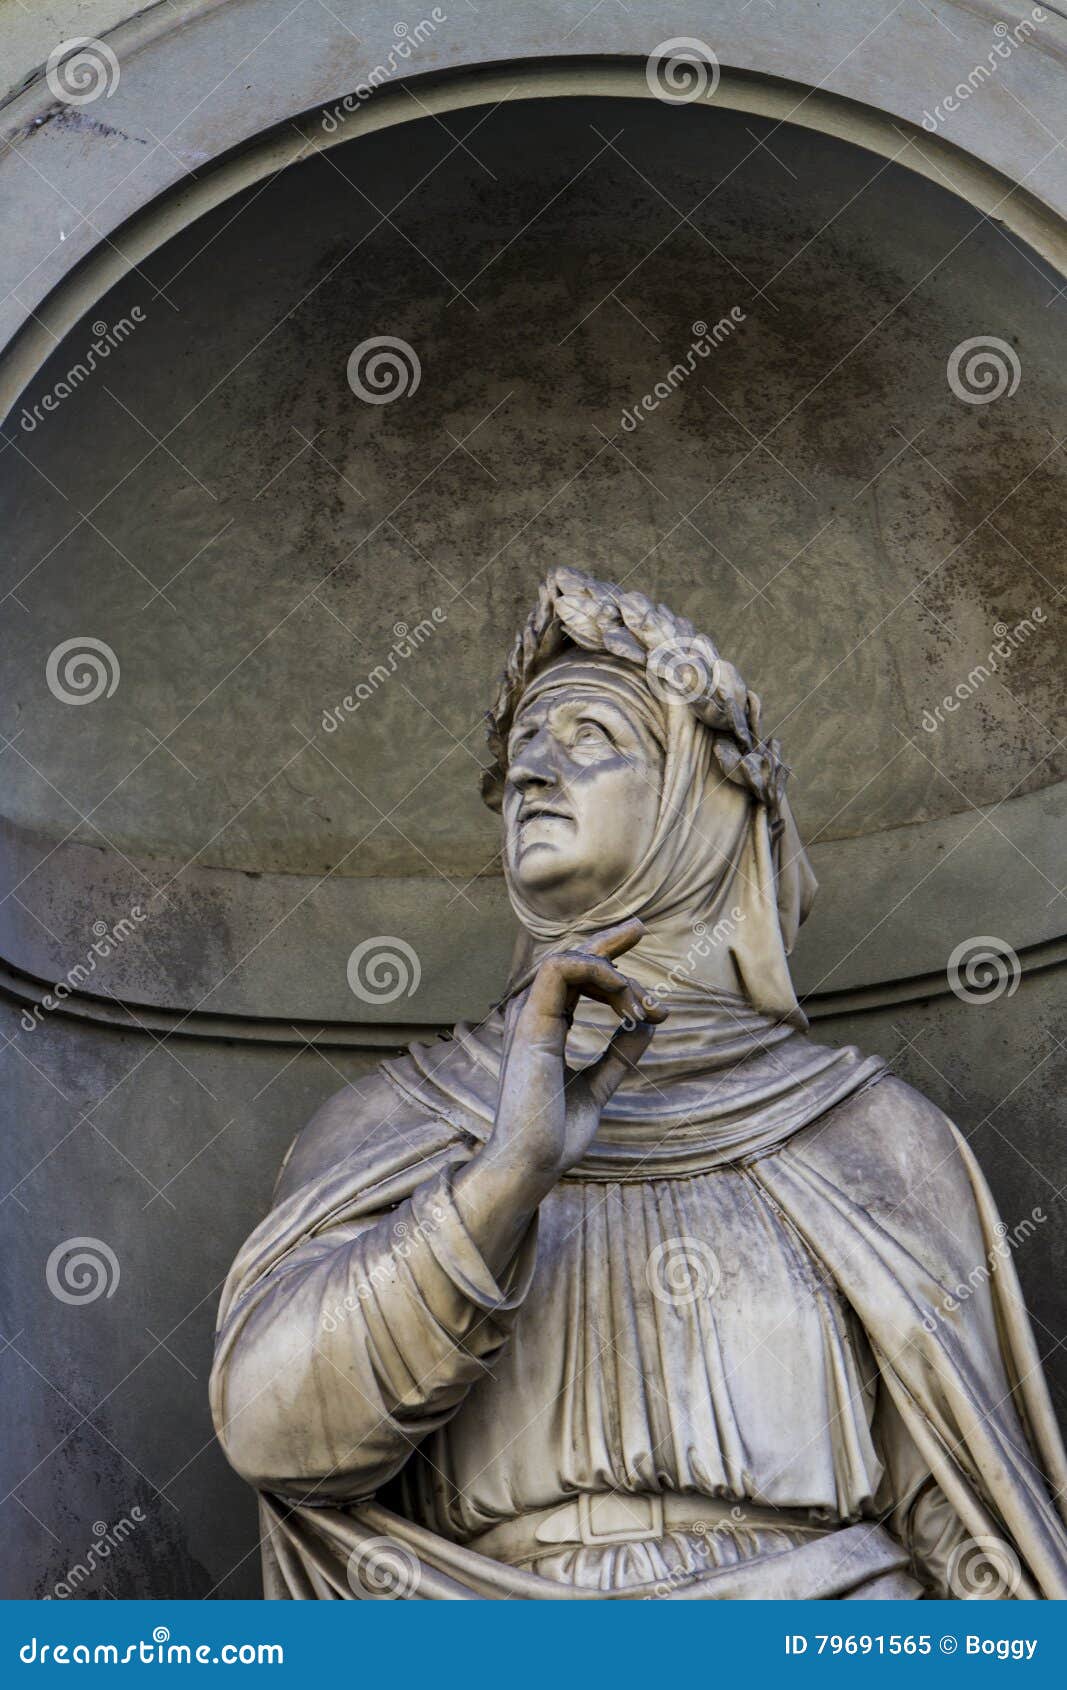 Francesco Petrarca Monument In Florence Stock Image ...